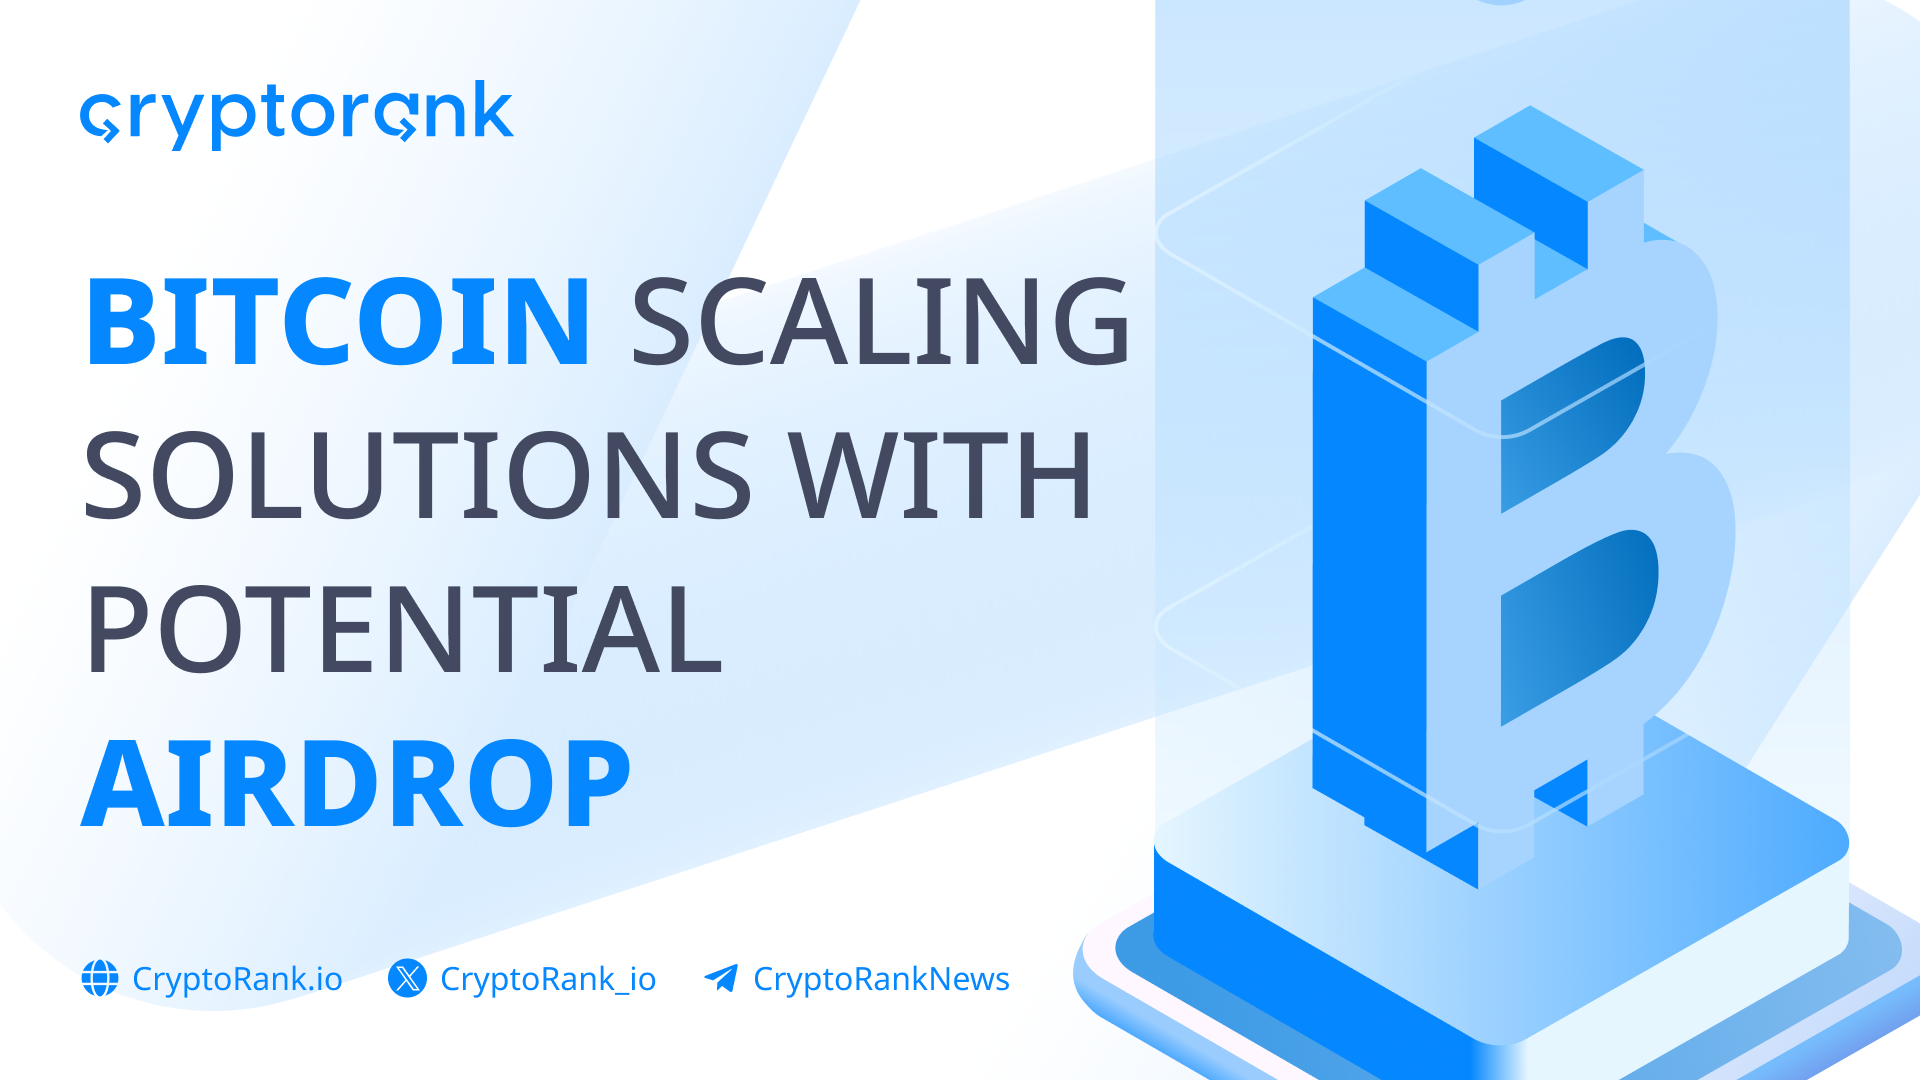 Bitcoin Scaling Solutions With Potential Airdrop